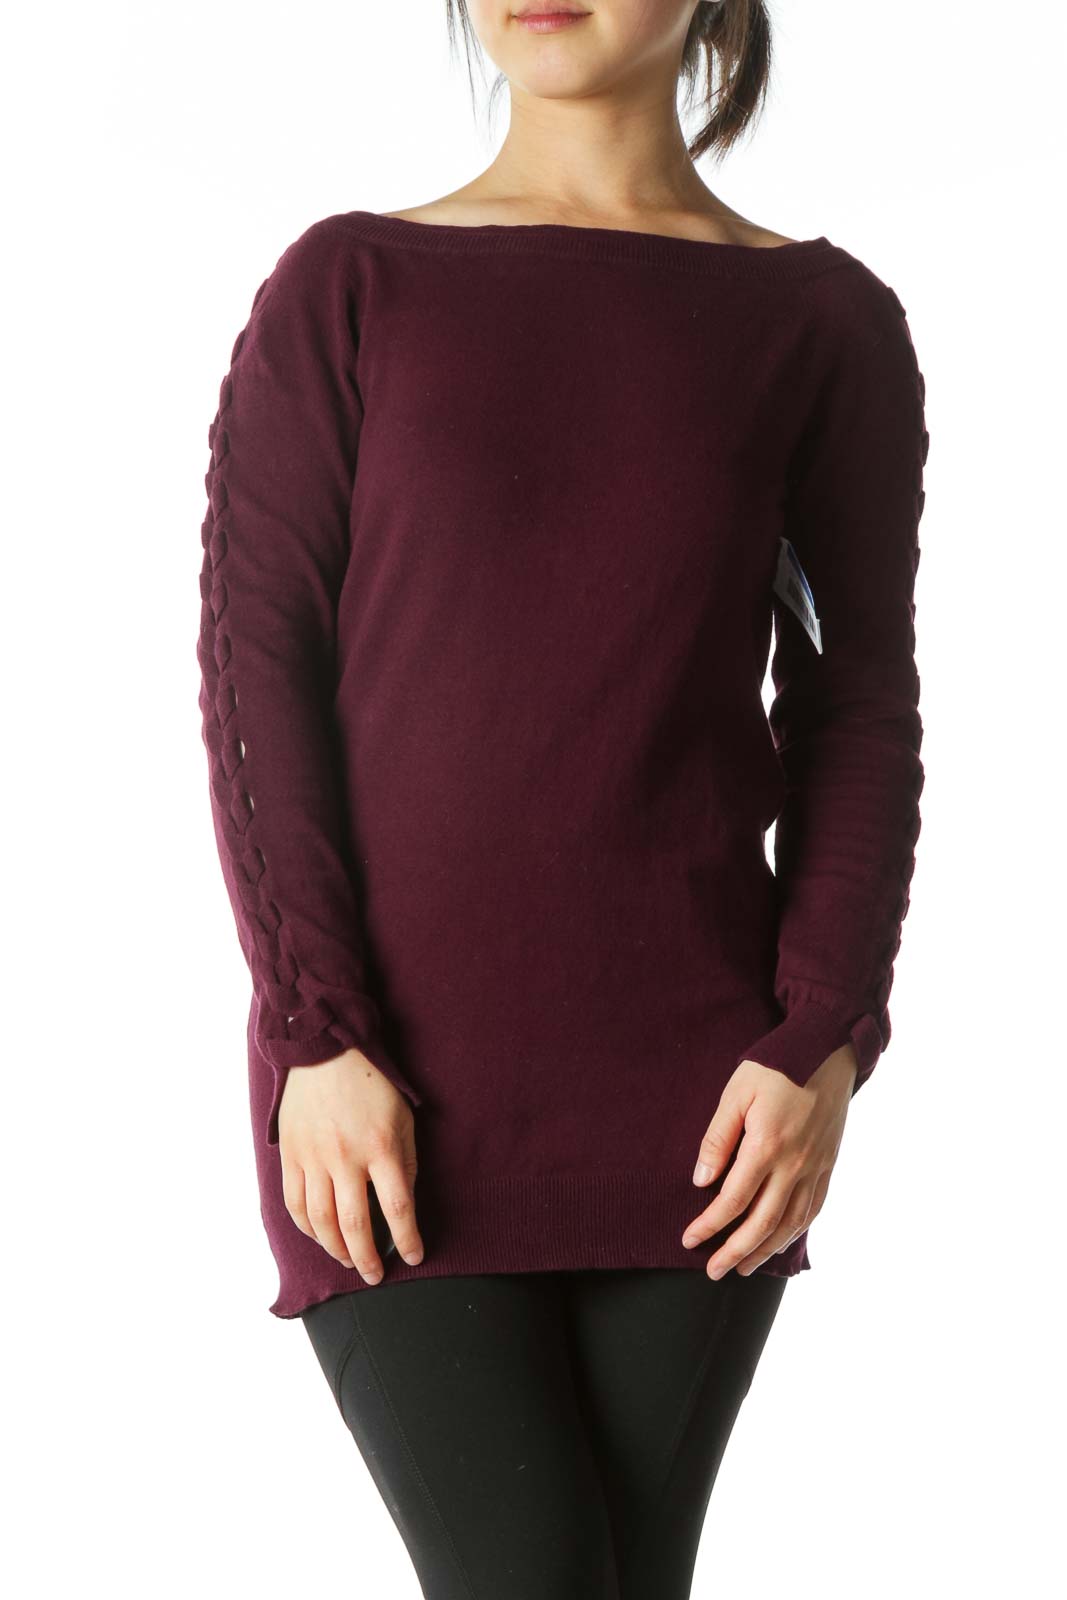 Deep Burgundy Crocheted-Sleeve Boat-Neck Sweater Front